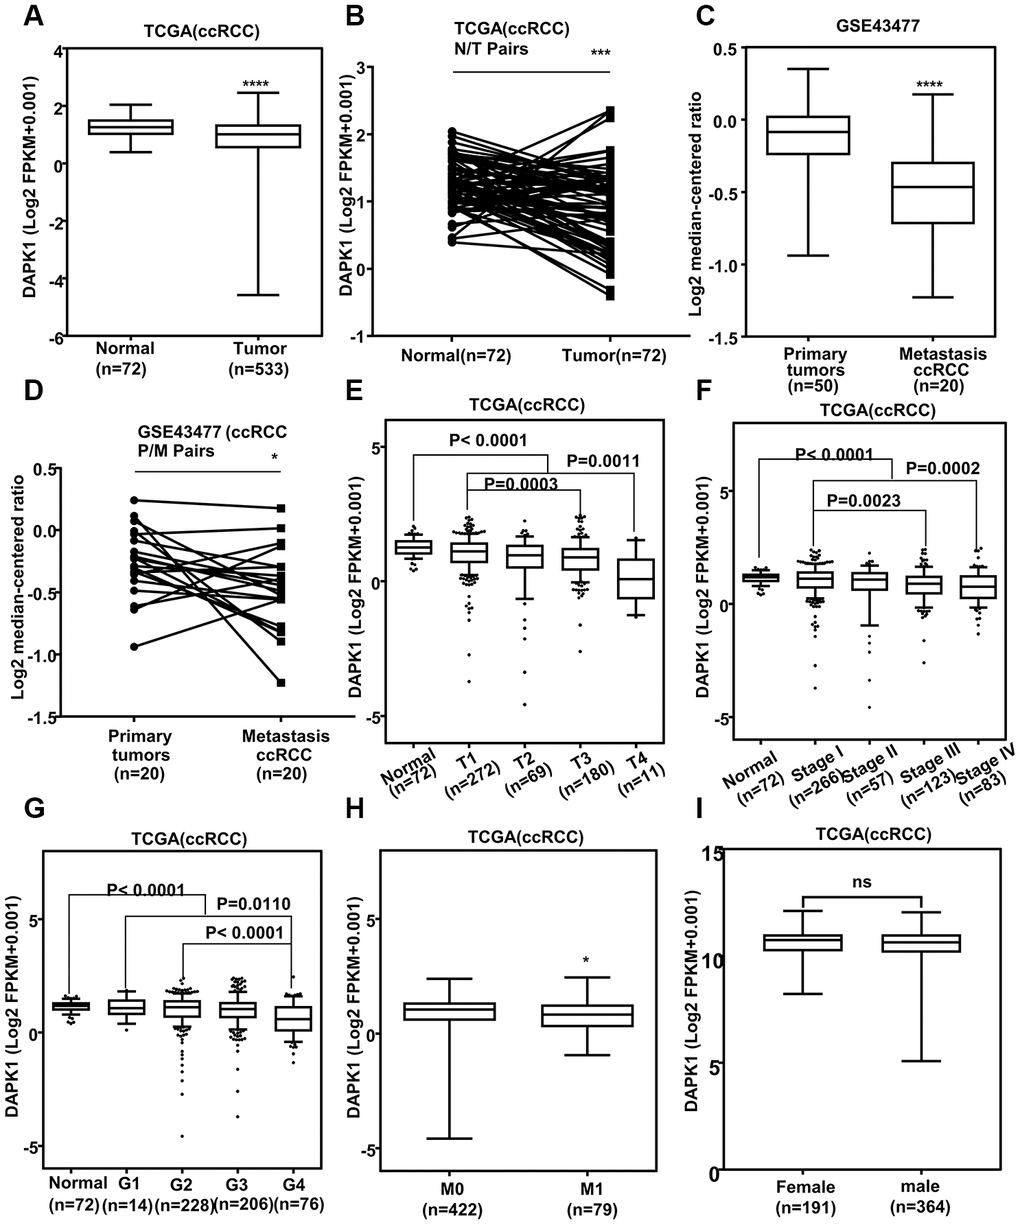 Low DAPK1 expression correlates with tumor progression and metastasis in ccRCC patients. (A) DAPK1 mRNA expression in ccRCC (n=531) and adjacent normal kidney tissues (n=72) from the The Cancer Genome Atlas-Kidney Renal clear cell Carcinoma (TCGA-KIRC) database. (B) DAPK1 mRNA expression in paired ccRCC and para-cancerous kidney tissues (n=72) from the TCGA-KIRC database. (C) DAPK1 mRNA expression in primary (n=50) and metastatic ccRCC (n=20) tumors from the GSE43477 dataset. (D) DAPK1 mRNA expression in paired primary and metastatic ccRCC tumors (n=20) from the GSE43477 database. (E–I) Correlation between DAPK1 mRNA expression and clinicopathological parameters, including (E) T stage (T1-T4), (F) pathologic stage (I-IV), (G) tumor grade (G1-G4), (H) distant metastases, and (I) gender (male or female). Note: The data are shown as means ± SEM; ***p